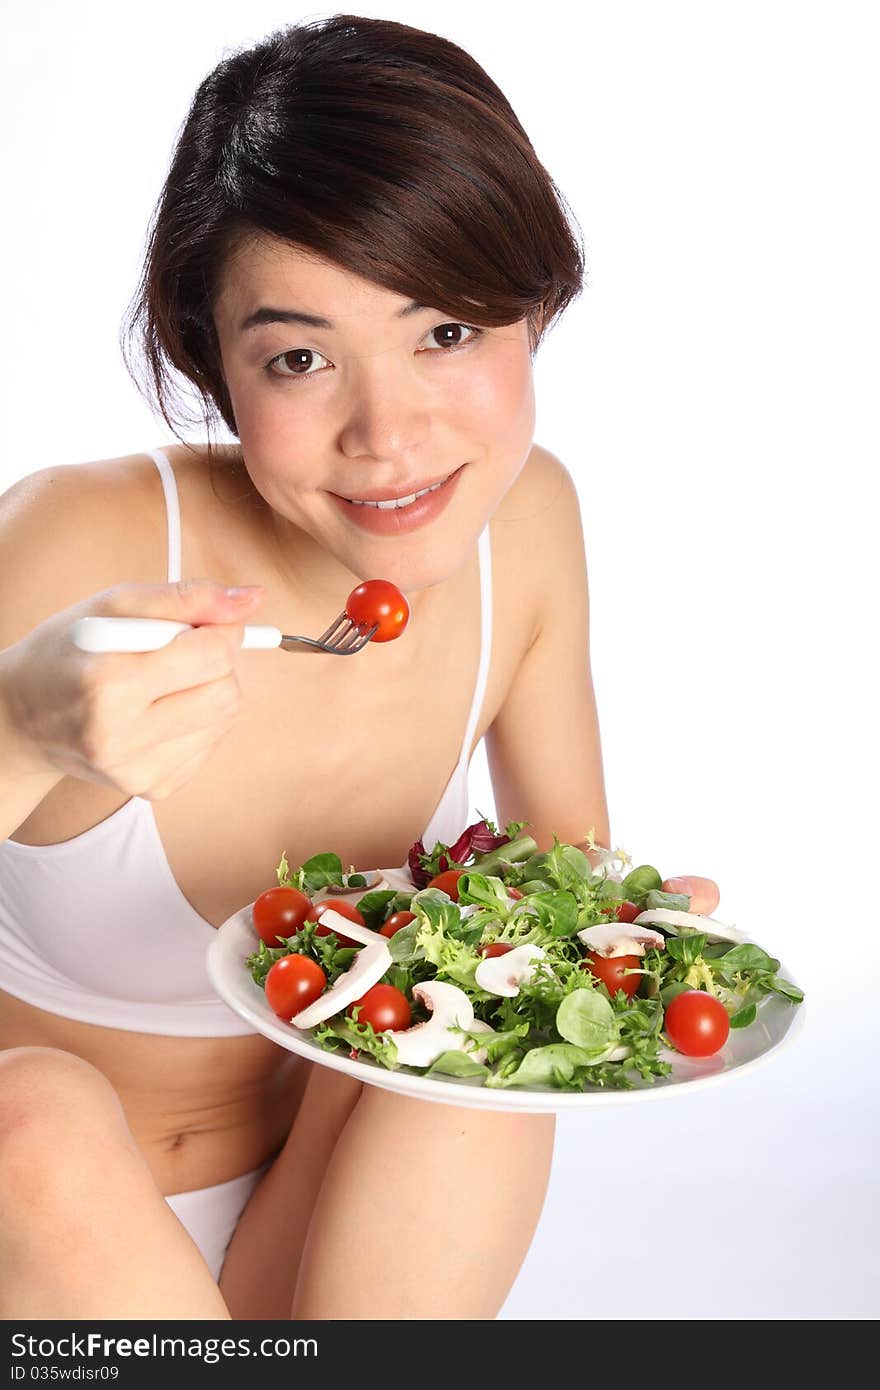 Beautiful, smiling young oriental girl, sitting on floor wearing sports underwear, showing off a healthy body while eating a salad. Beautiful, smiling young oriental girl, sitting on floor wearing sports underwear, showing off a healthy body while eating a salad.